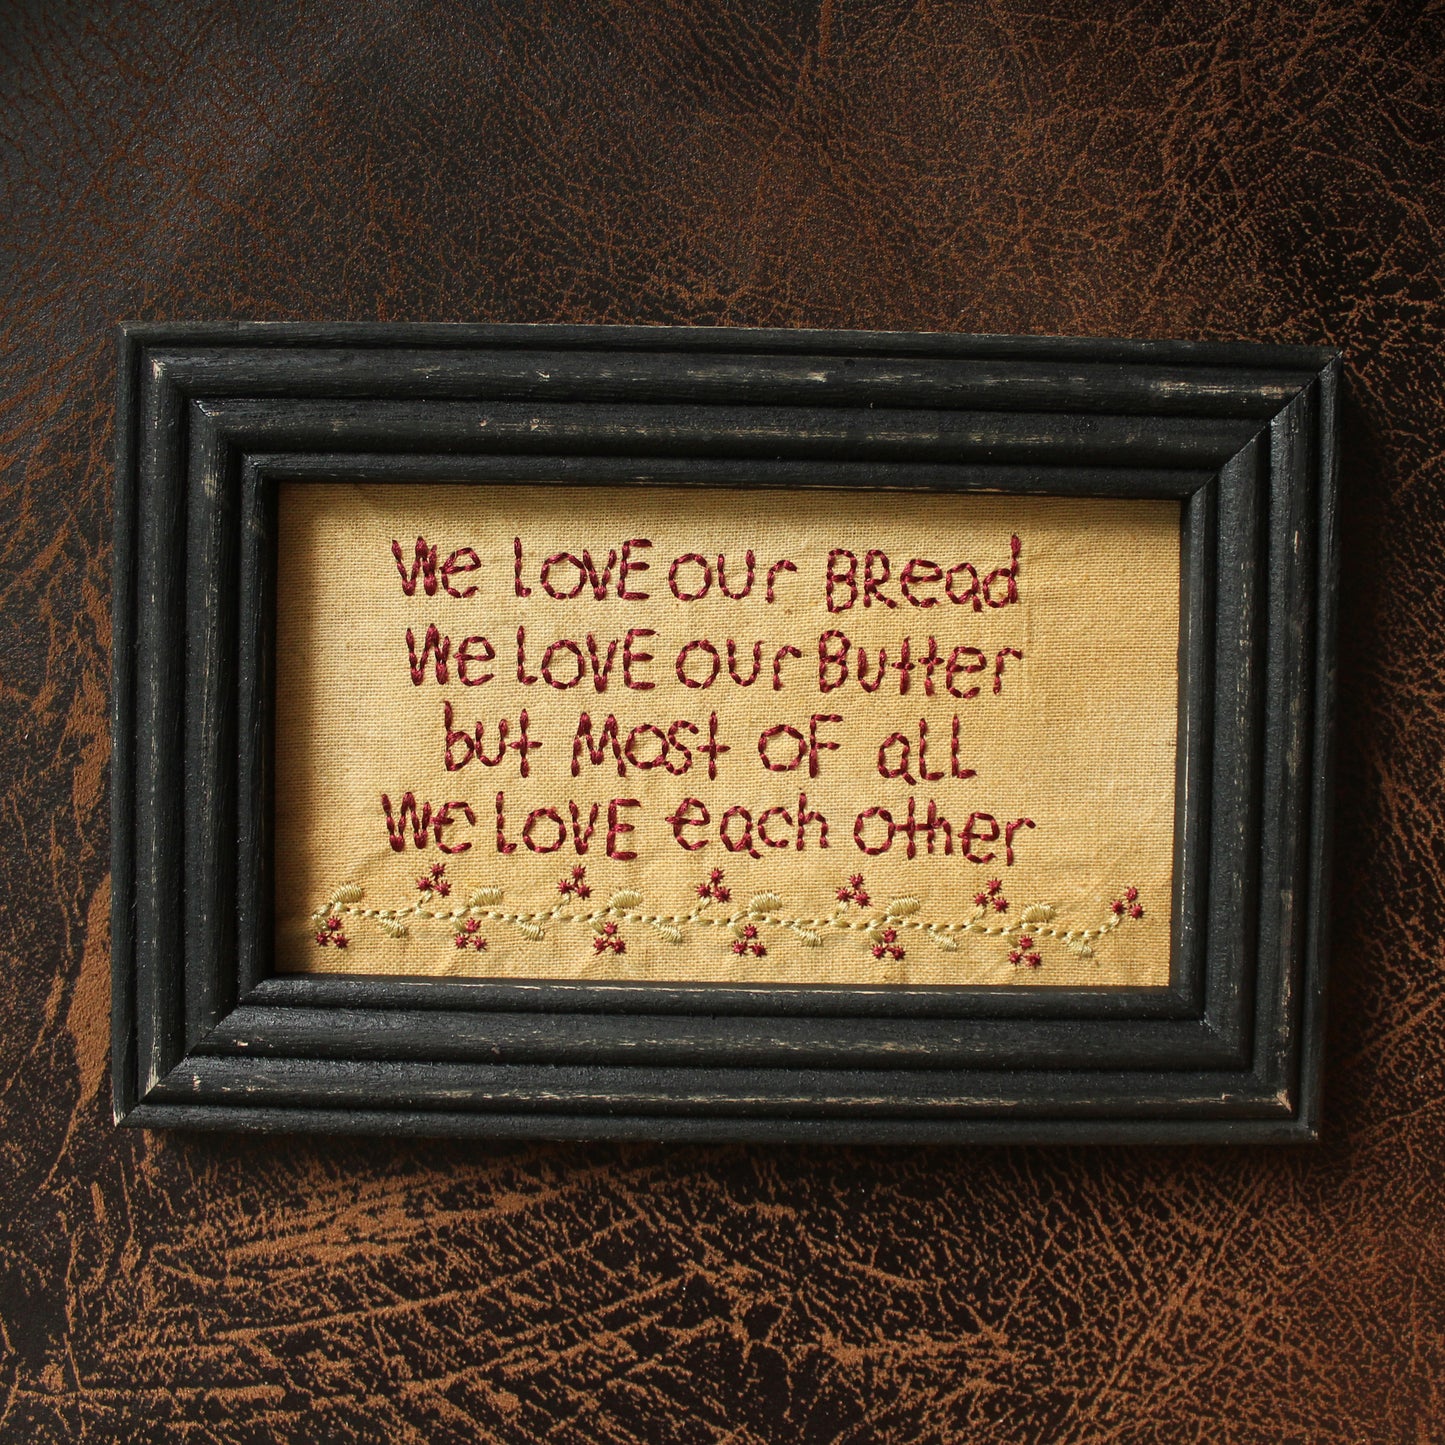 CVHOMEDECO. Primitives Antique We Love Our Bread, We Love Our Butter, But Most of All We Love Each Other Stitchery Frame Wall Mounted Hanging Decor Art, 9 x 6 Inch